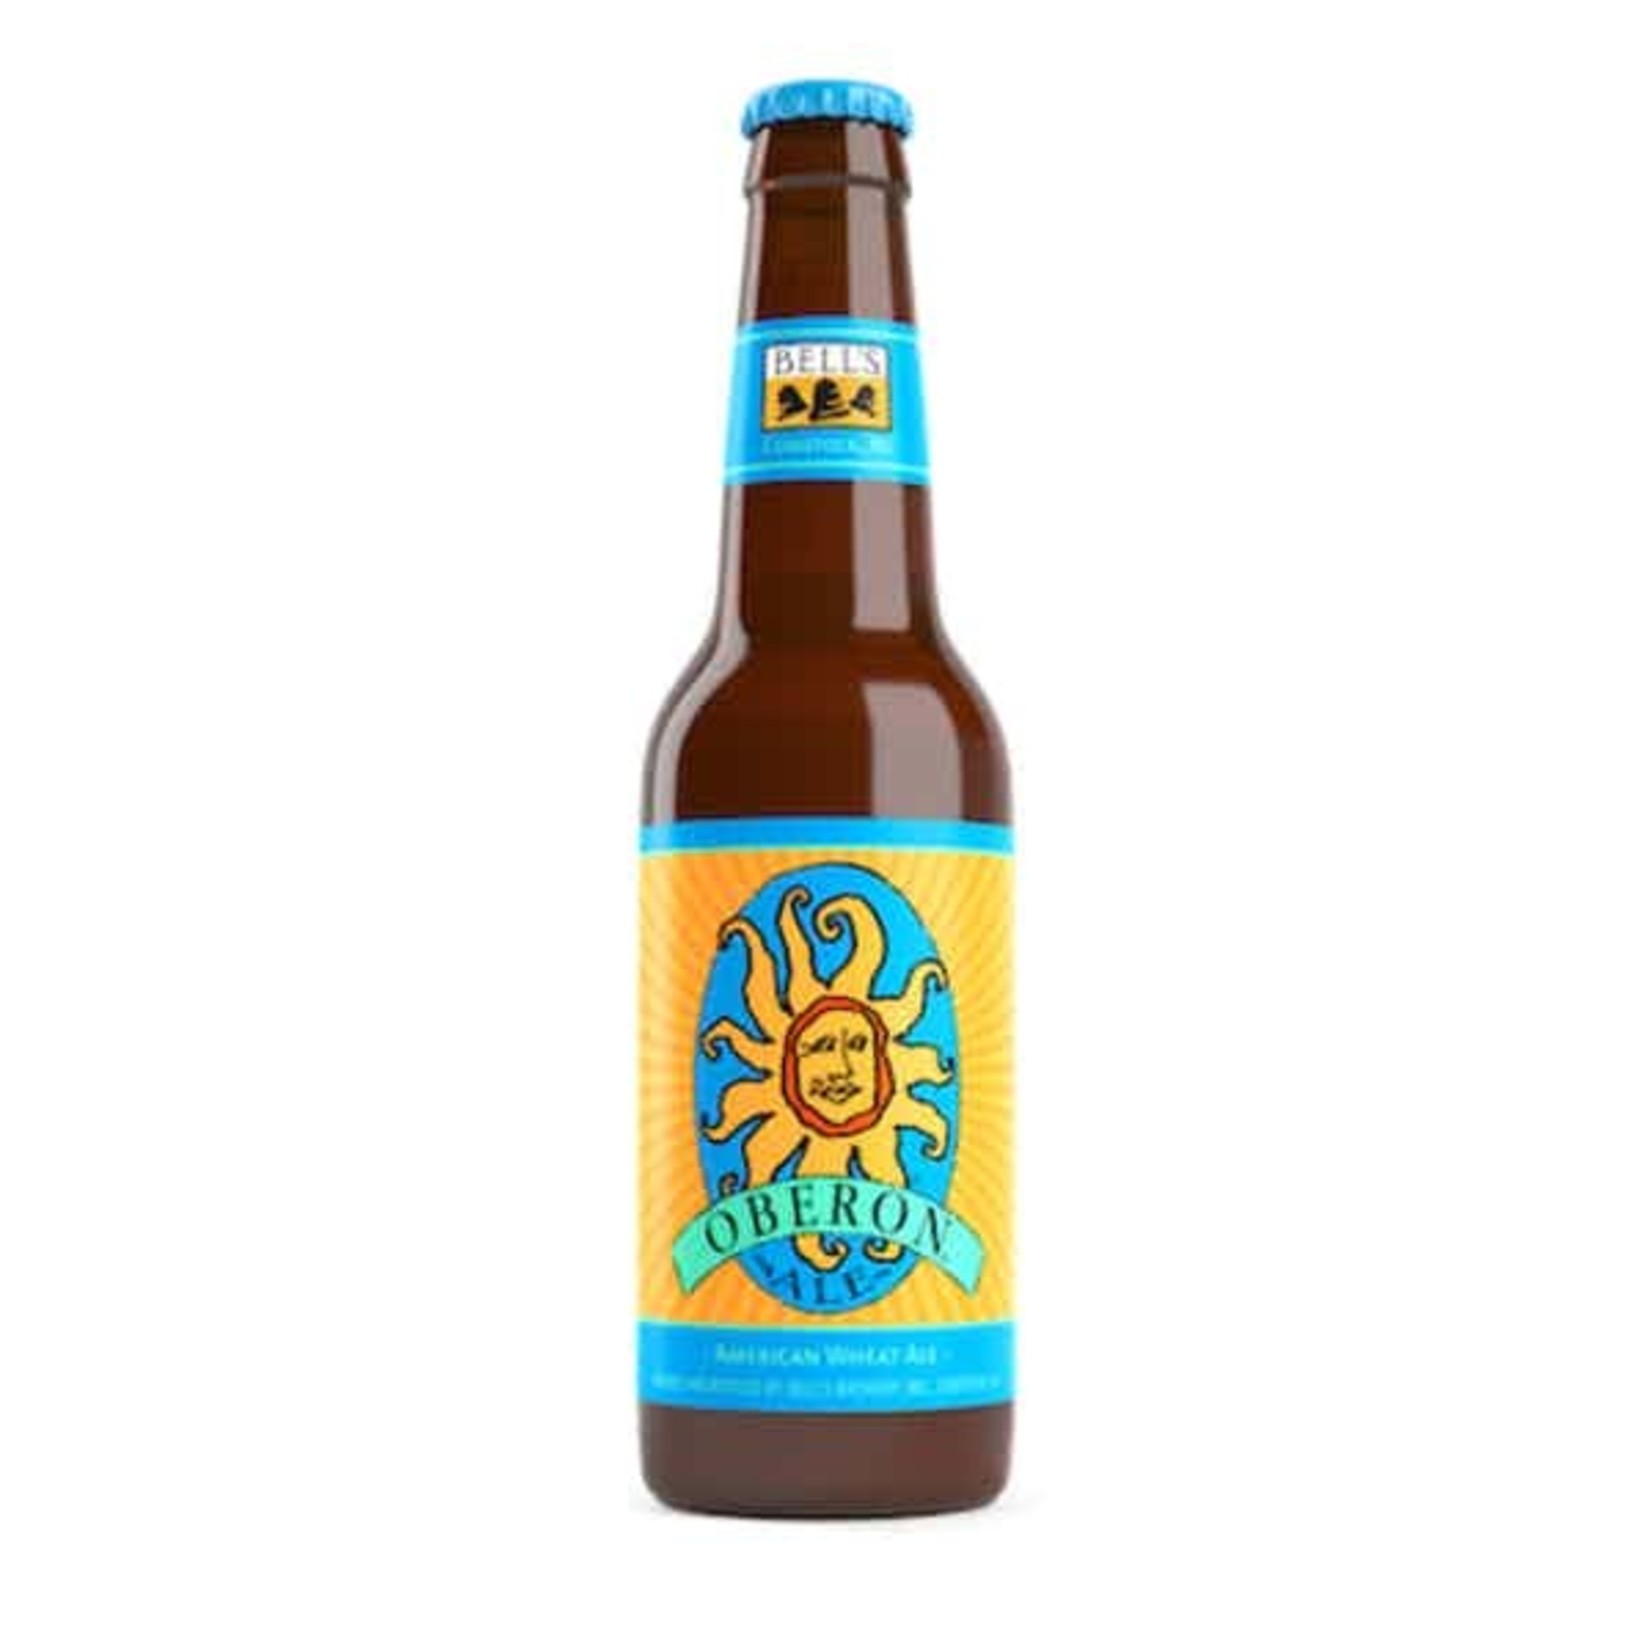 Bell's Bell's Oberon American Wheat Ale